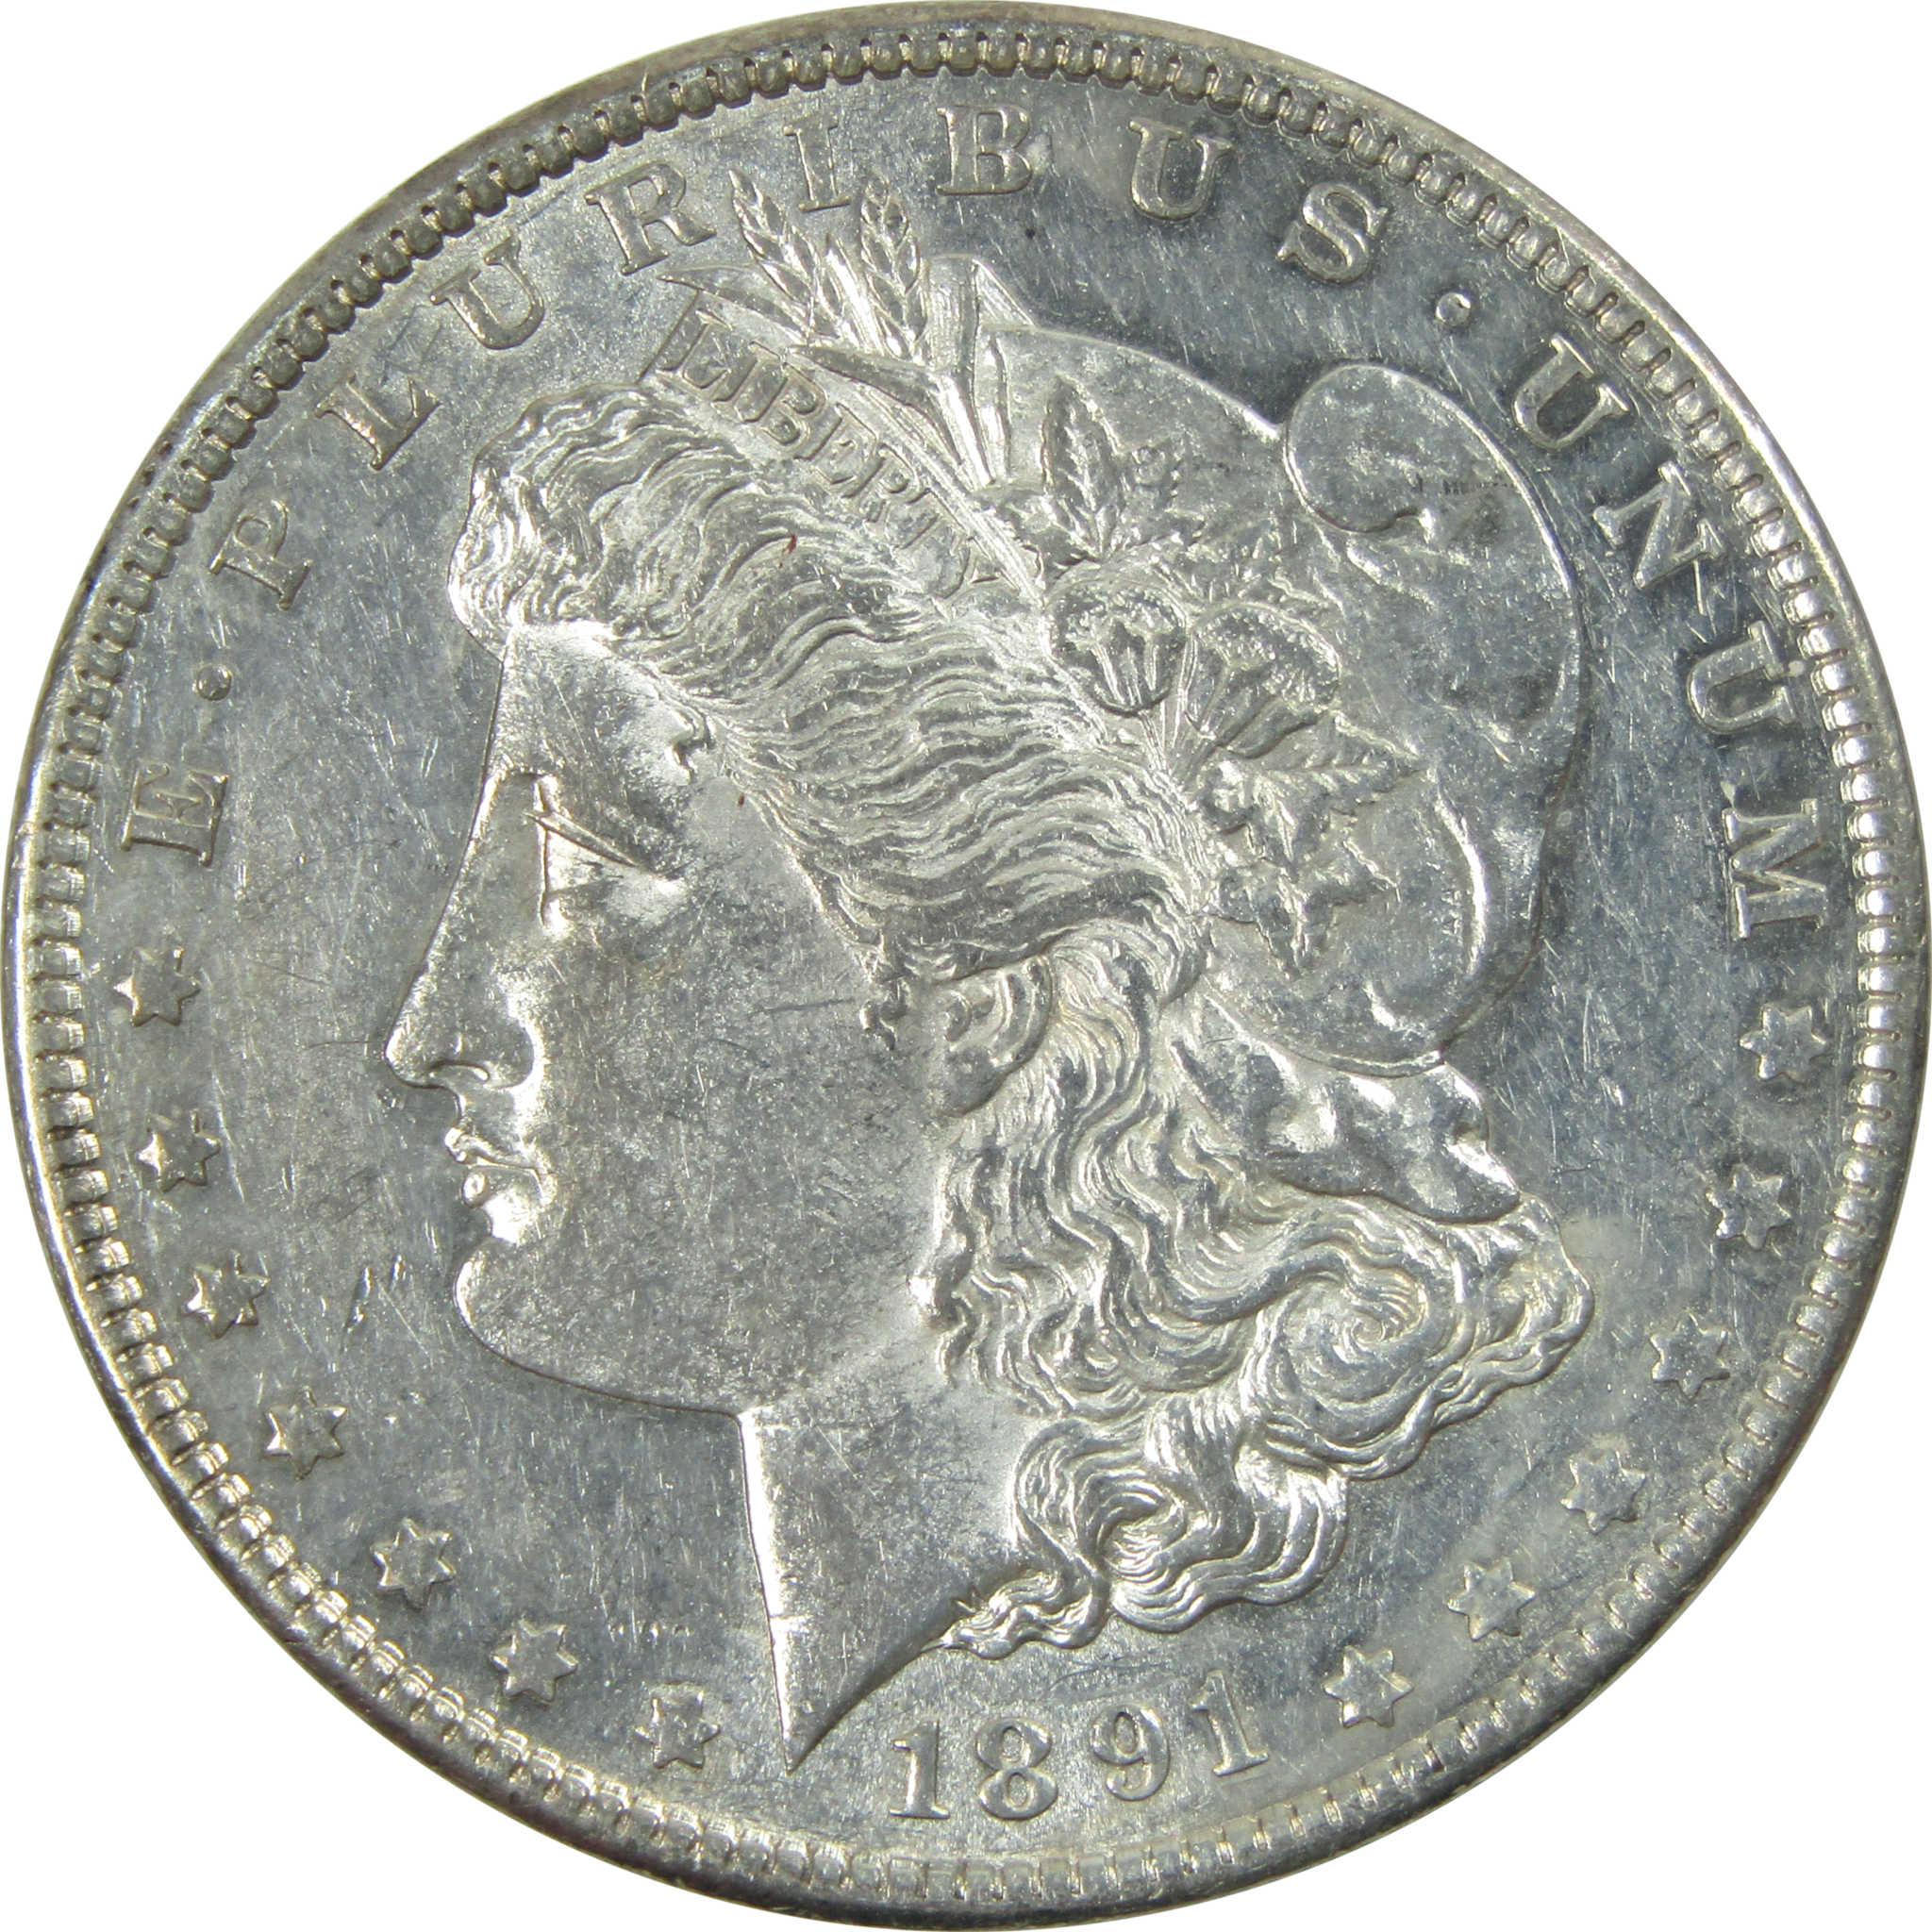 1891 S Morgan Dollar AU About Uncirculated Silver $1 Coin SKU:I13743 - Morgan coin - Morgan silver dollar - Morgan silver dollar for sale - Profile Coins &amp; Collectibles